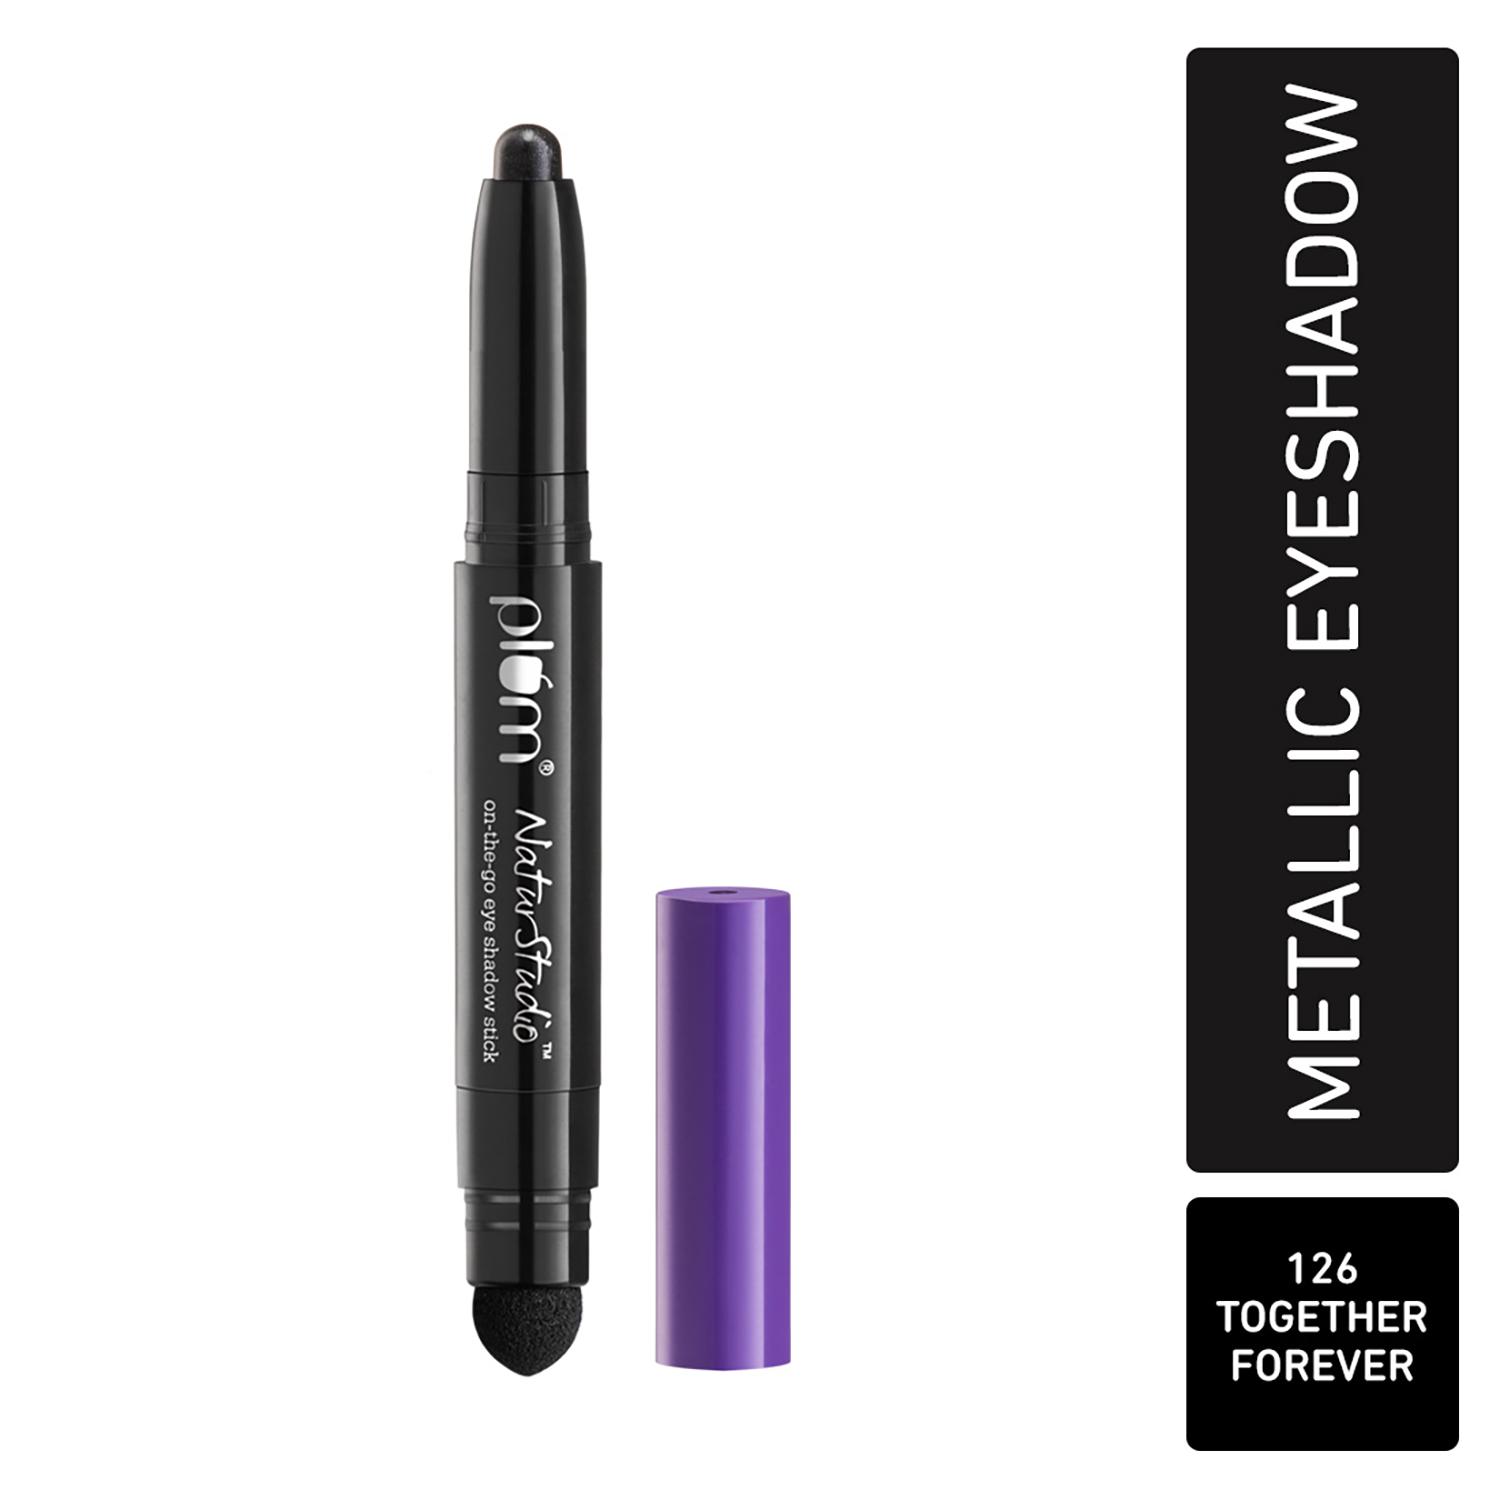 Plum | Plum NaturStudio on-the-go Eyeshadow Stick Waterproof & Crease-proof 126 Together Forever (1.2 g)